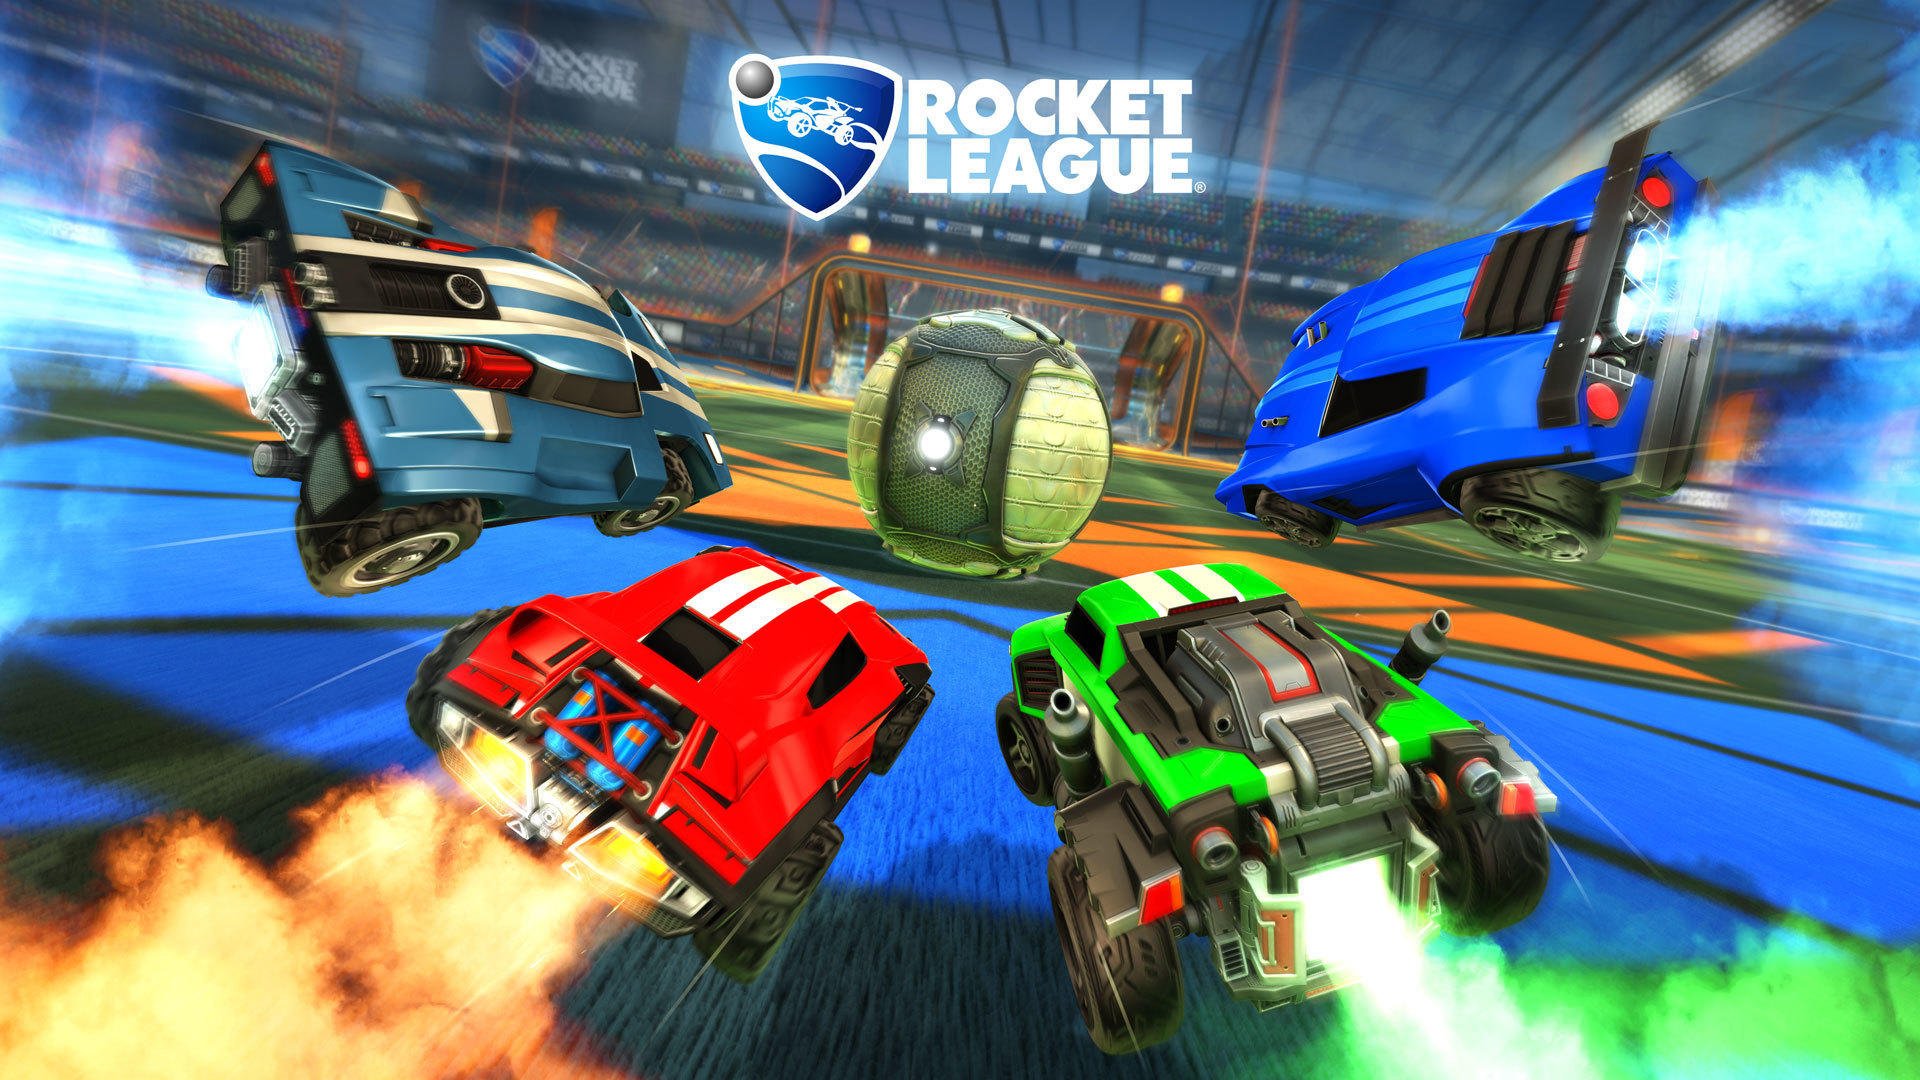 Sony Enables PS4 Rocket League CrossPlatform Play for PC and Consoles